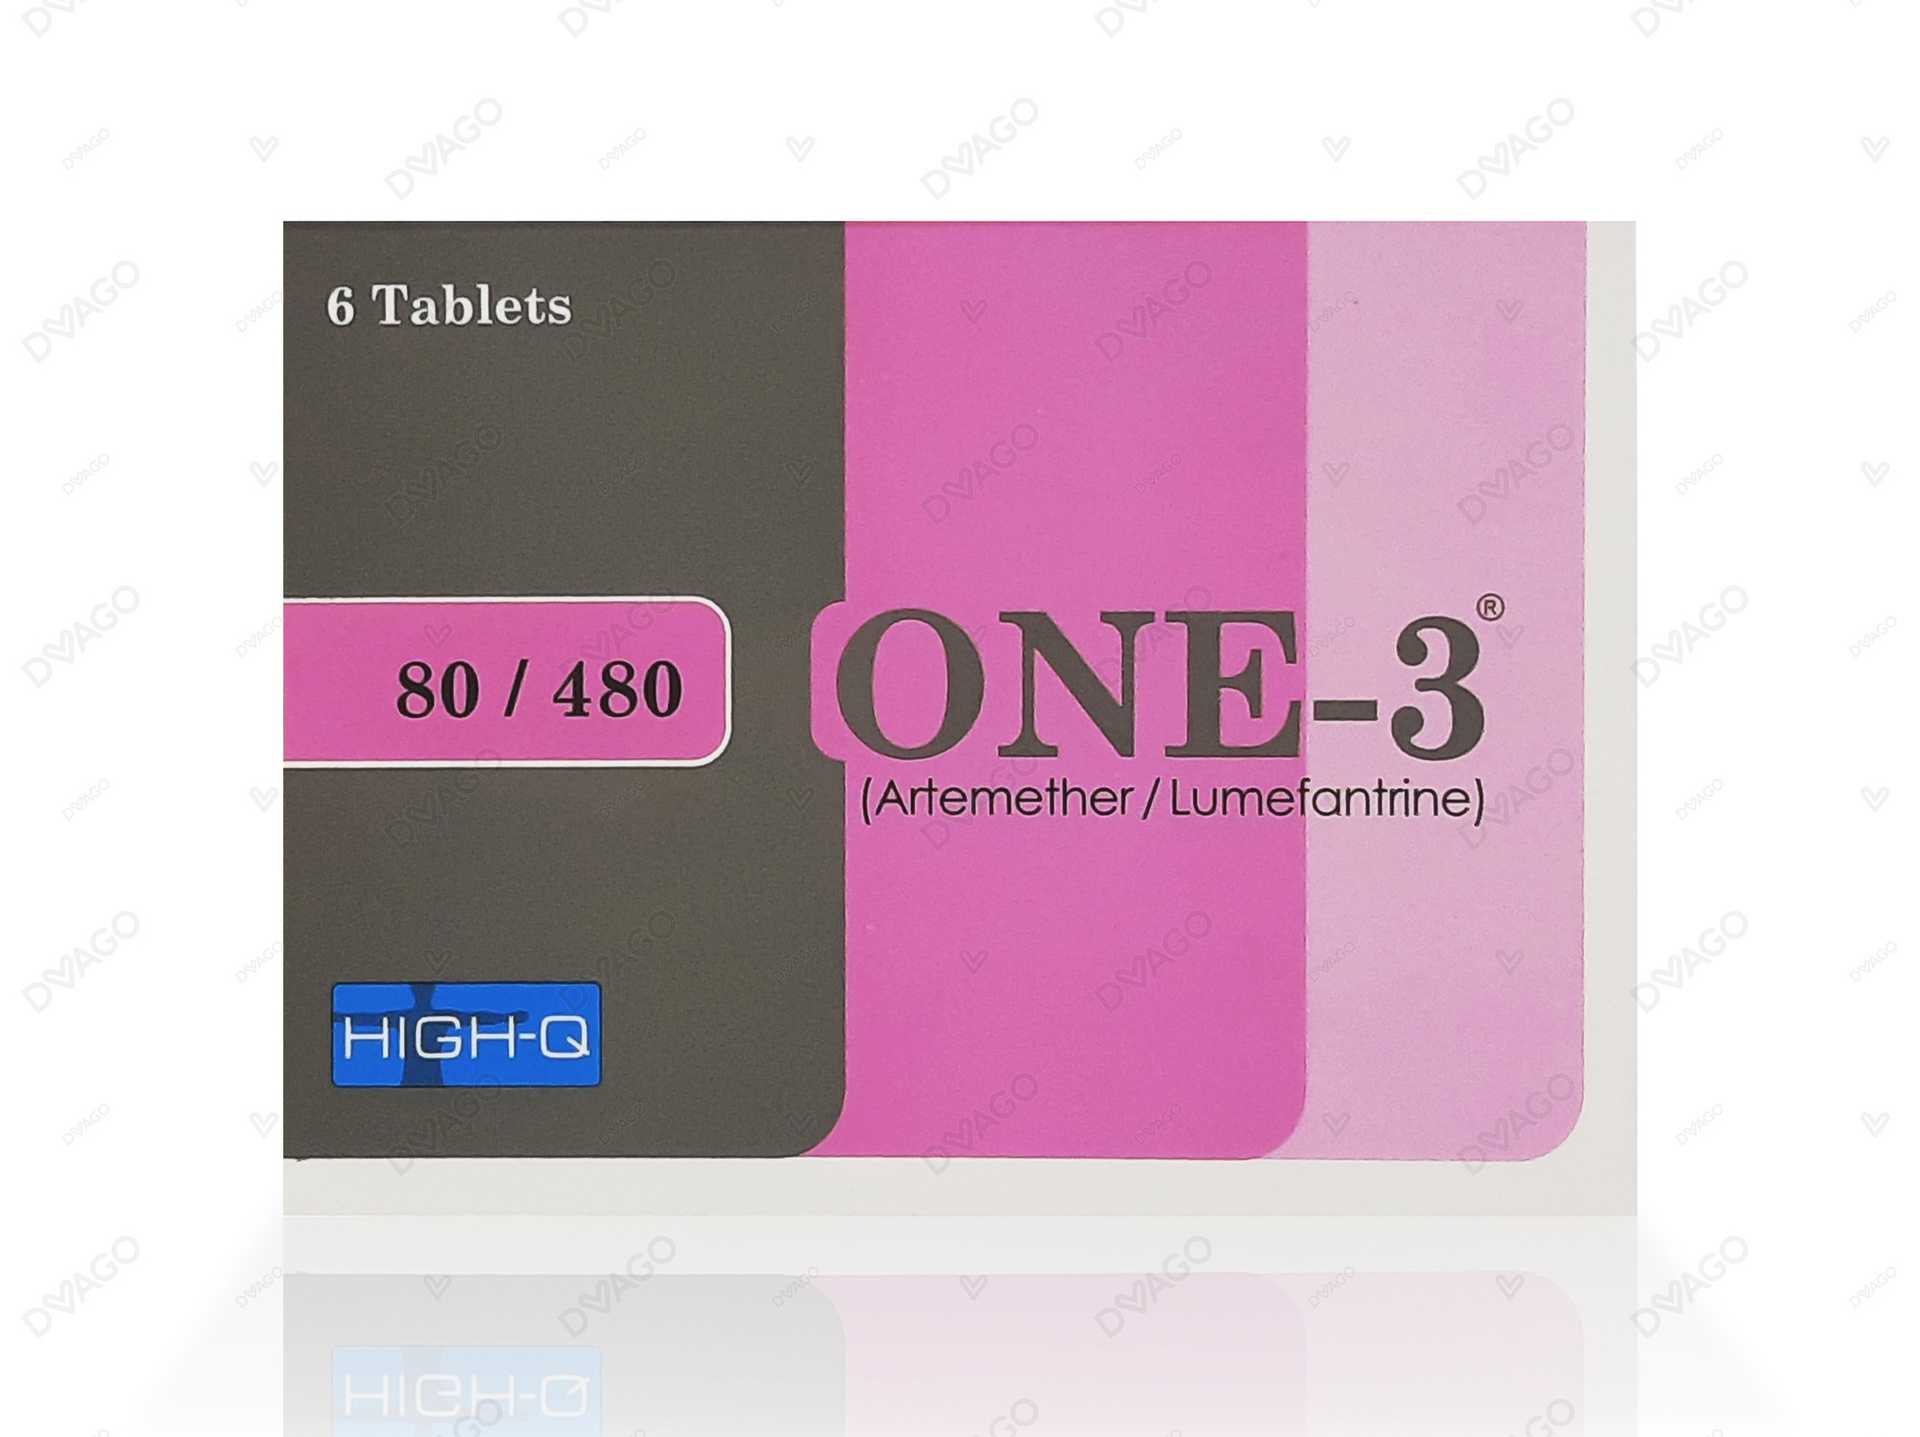 one-3 tablets 80/480mg